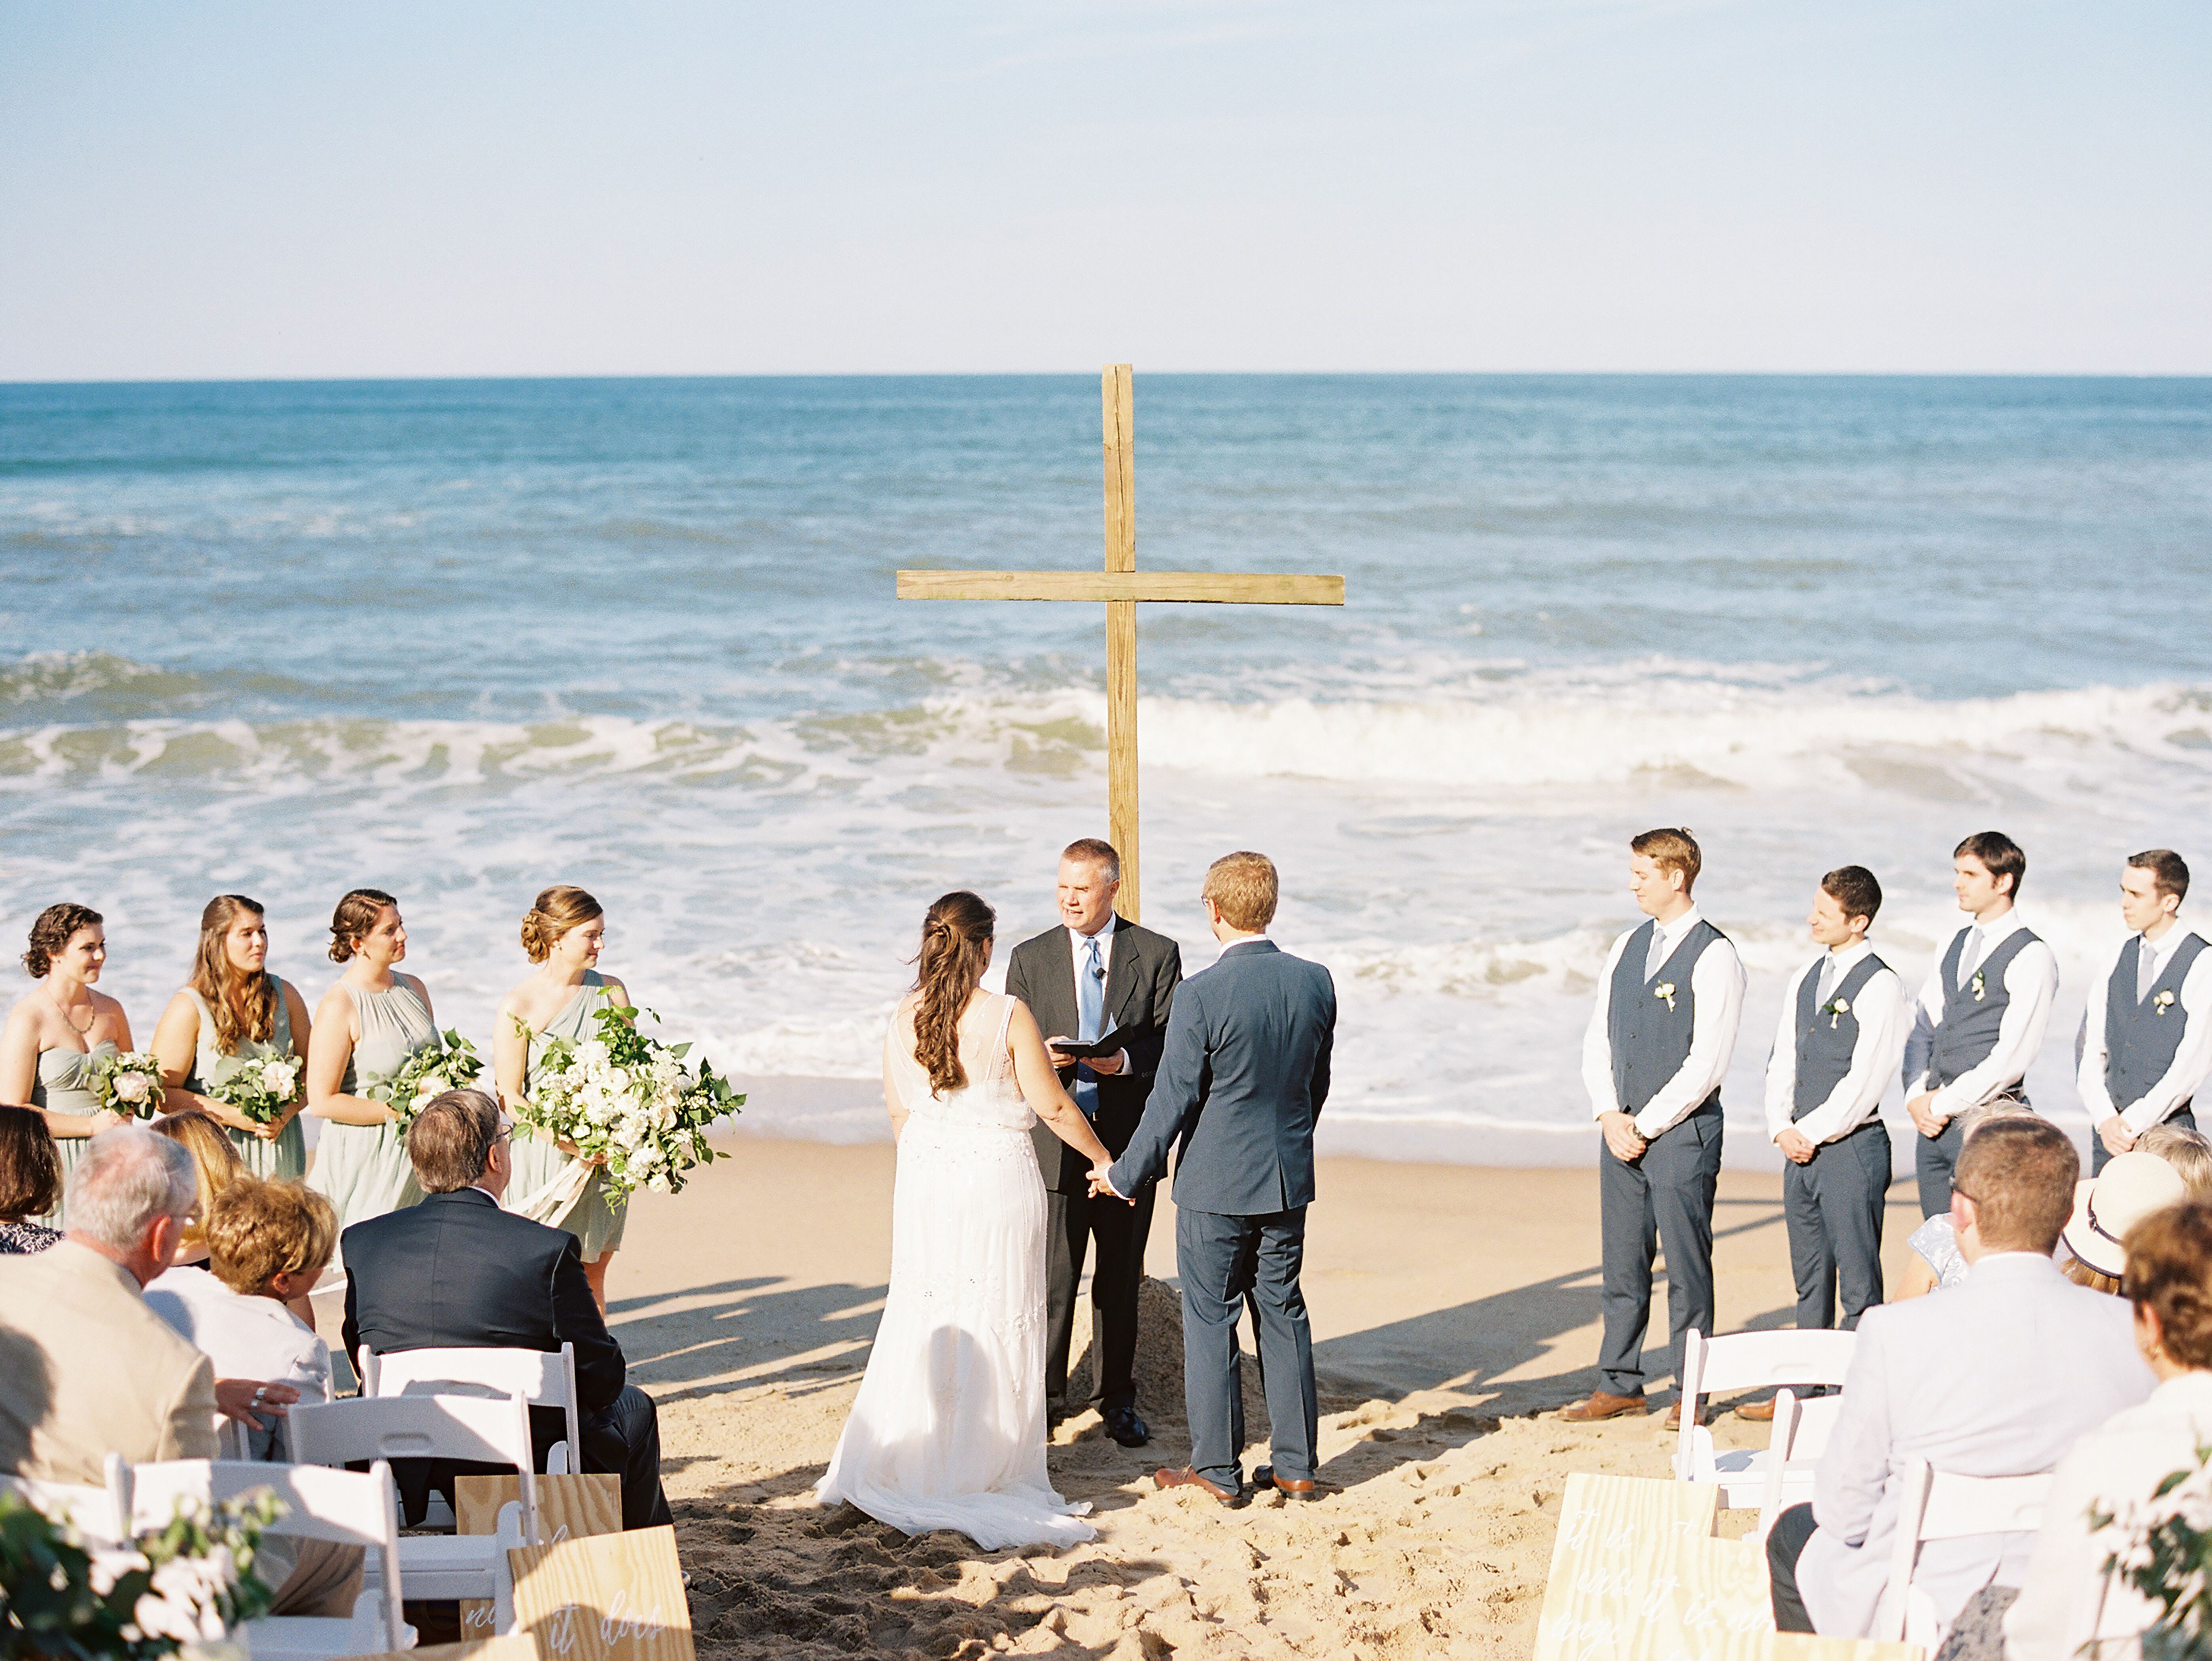 Destination Wedding Ceremony: What Are the Best Venue Options ...